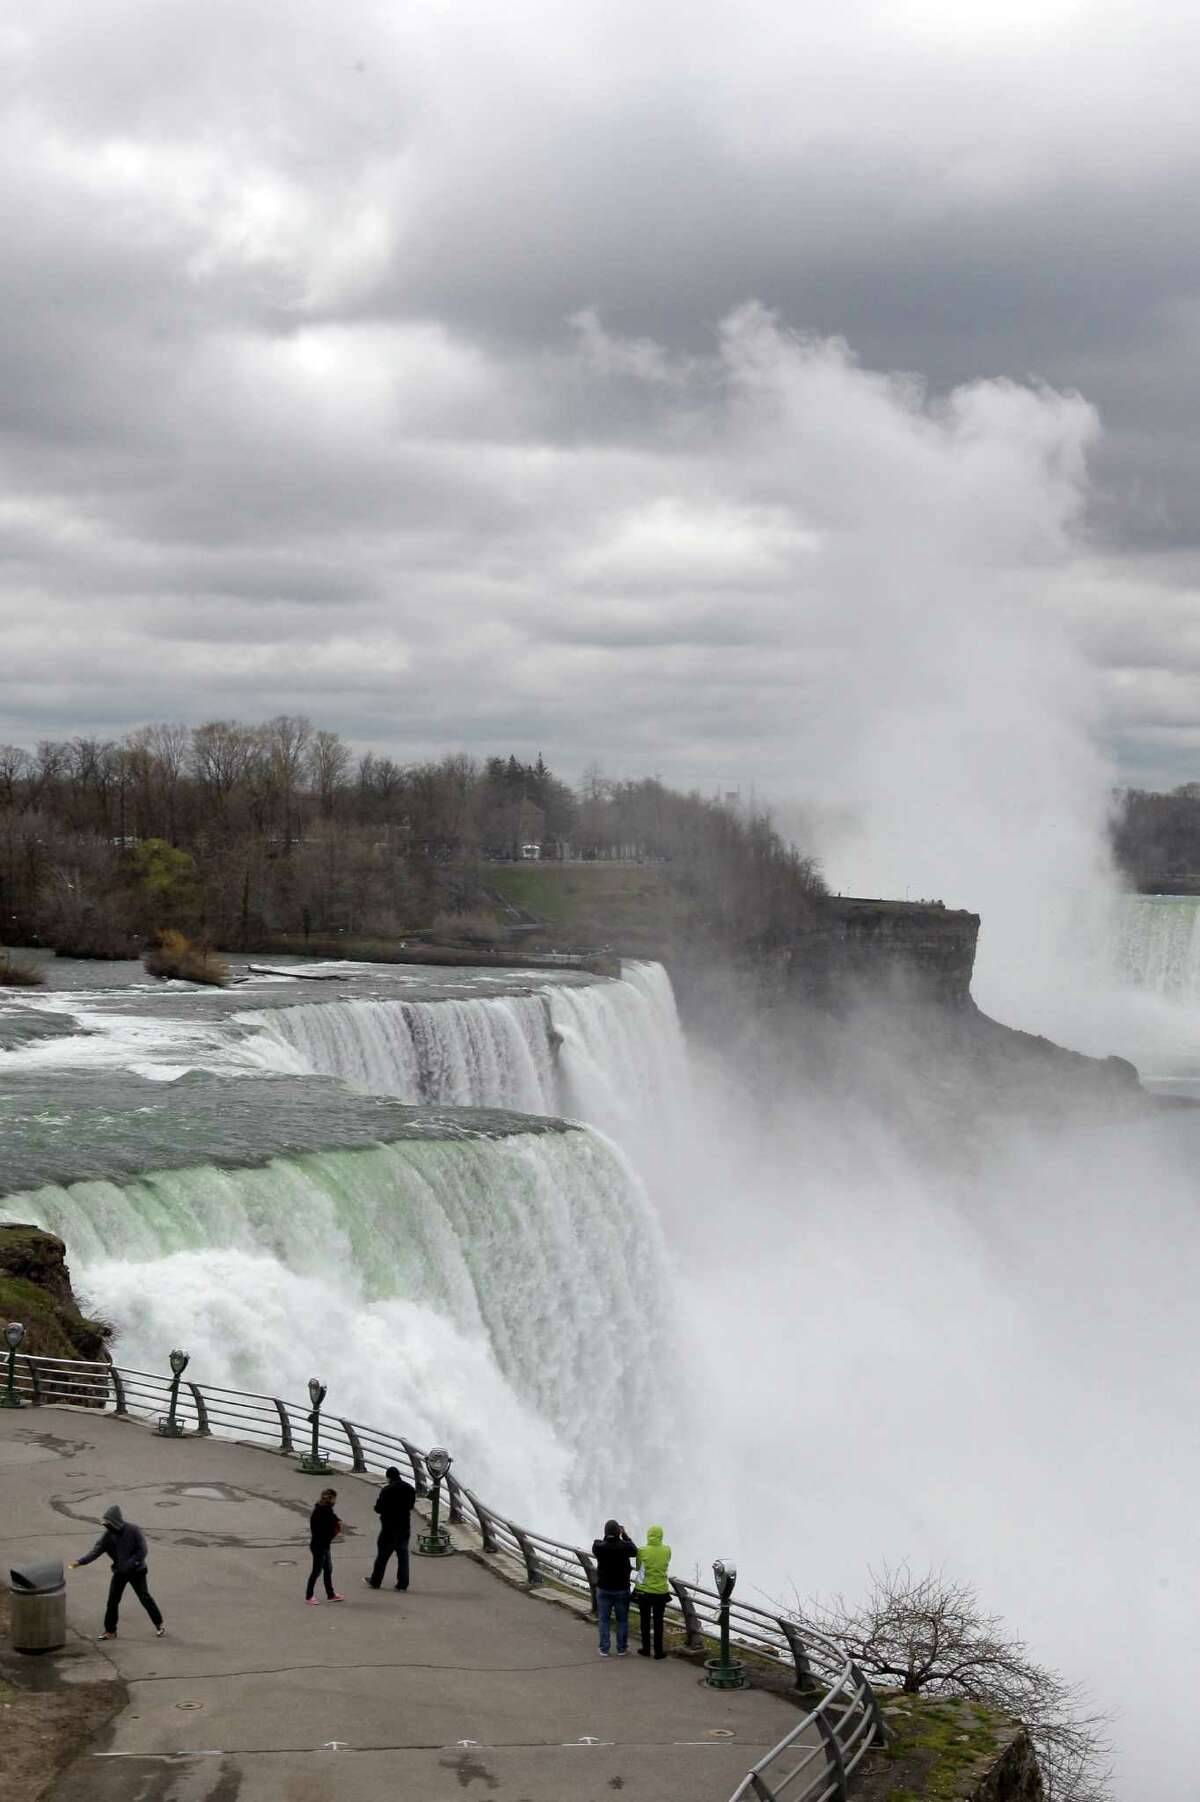 FILE--In this April 11, 2012 file photo, tourists visit the American Falls in Niagara Falls, N.Y. New York officials are considering temporarily turning Niagara Falls into a trickle. State officials are holding a public hearing this week to discuss plans for replacing 115-year-old bridges linking the mainland to islands near the brink of Niagara Falls. To do so, they might reduce the flow on the American side of the falls by building a temporary structure to redirect Niagara River water to the Canadian side. (AP Photo/David Duprey, File) ORG XMIT: NYMG103